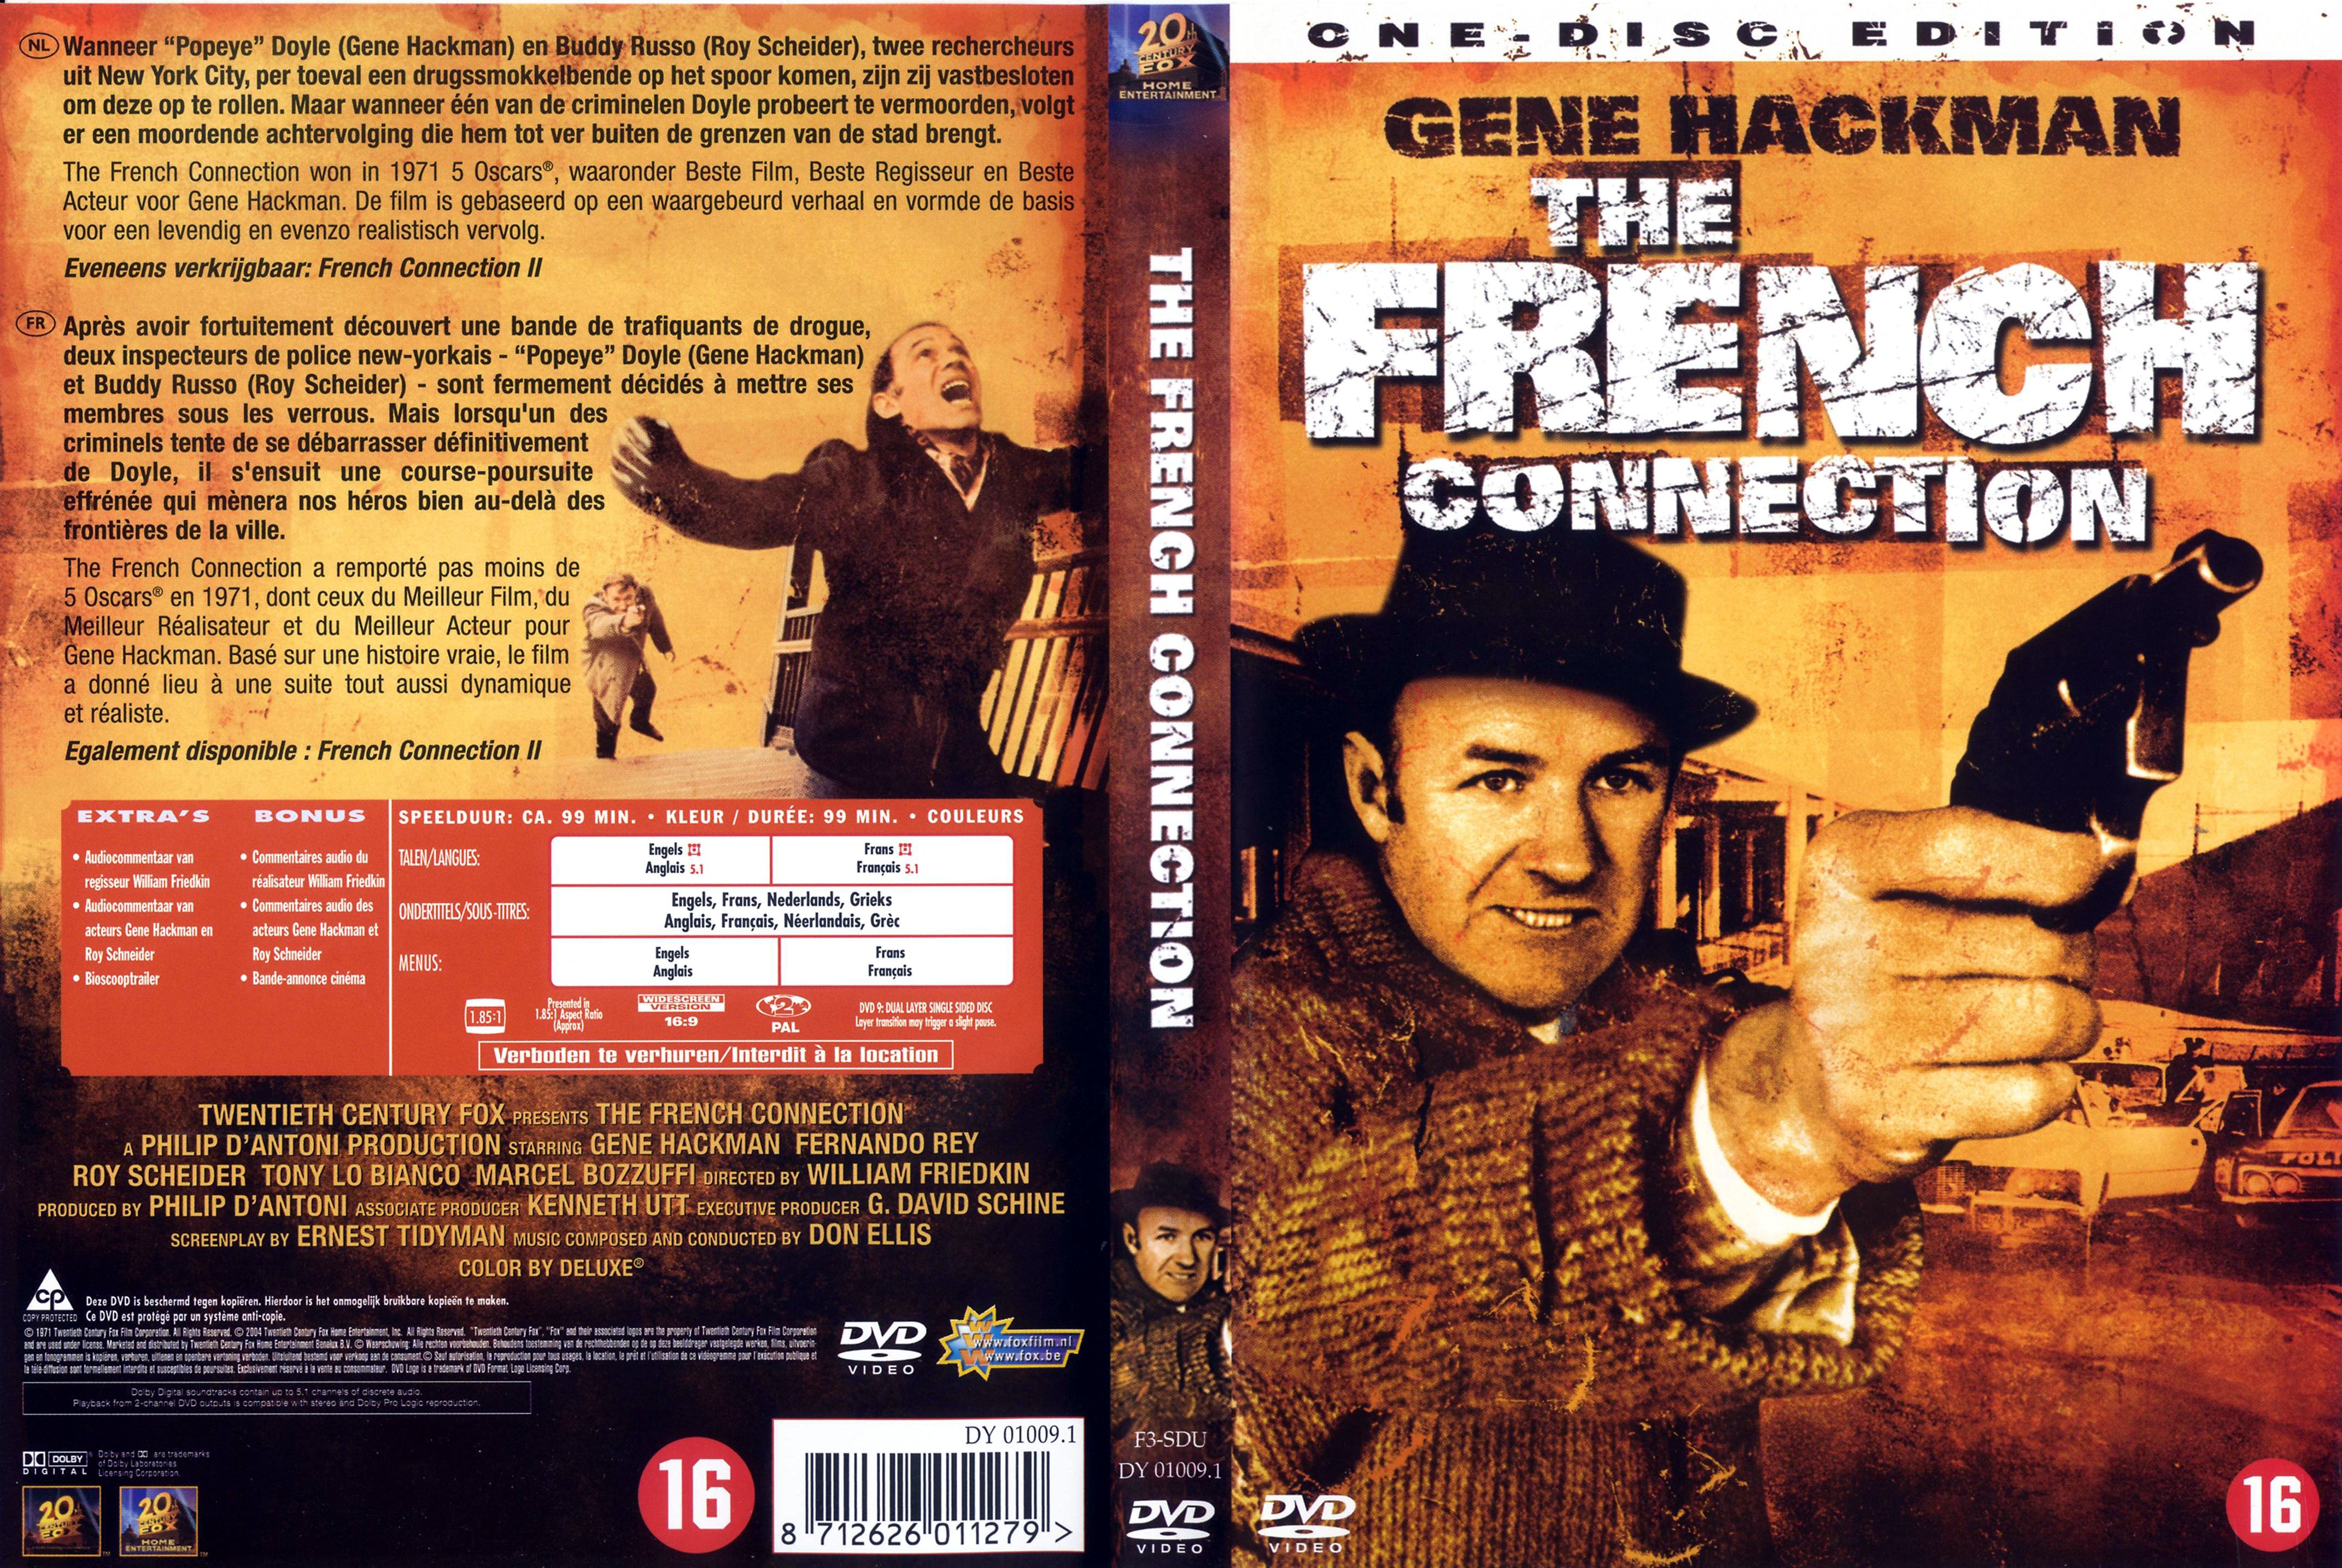 Jaquette DVD French connection v2